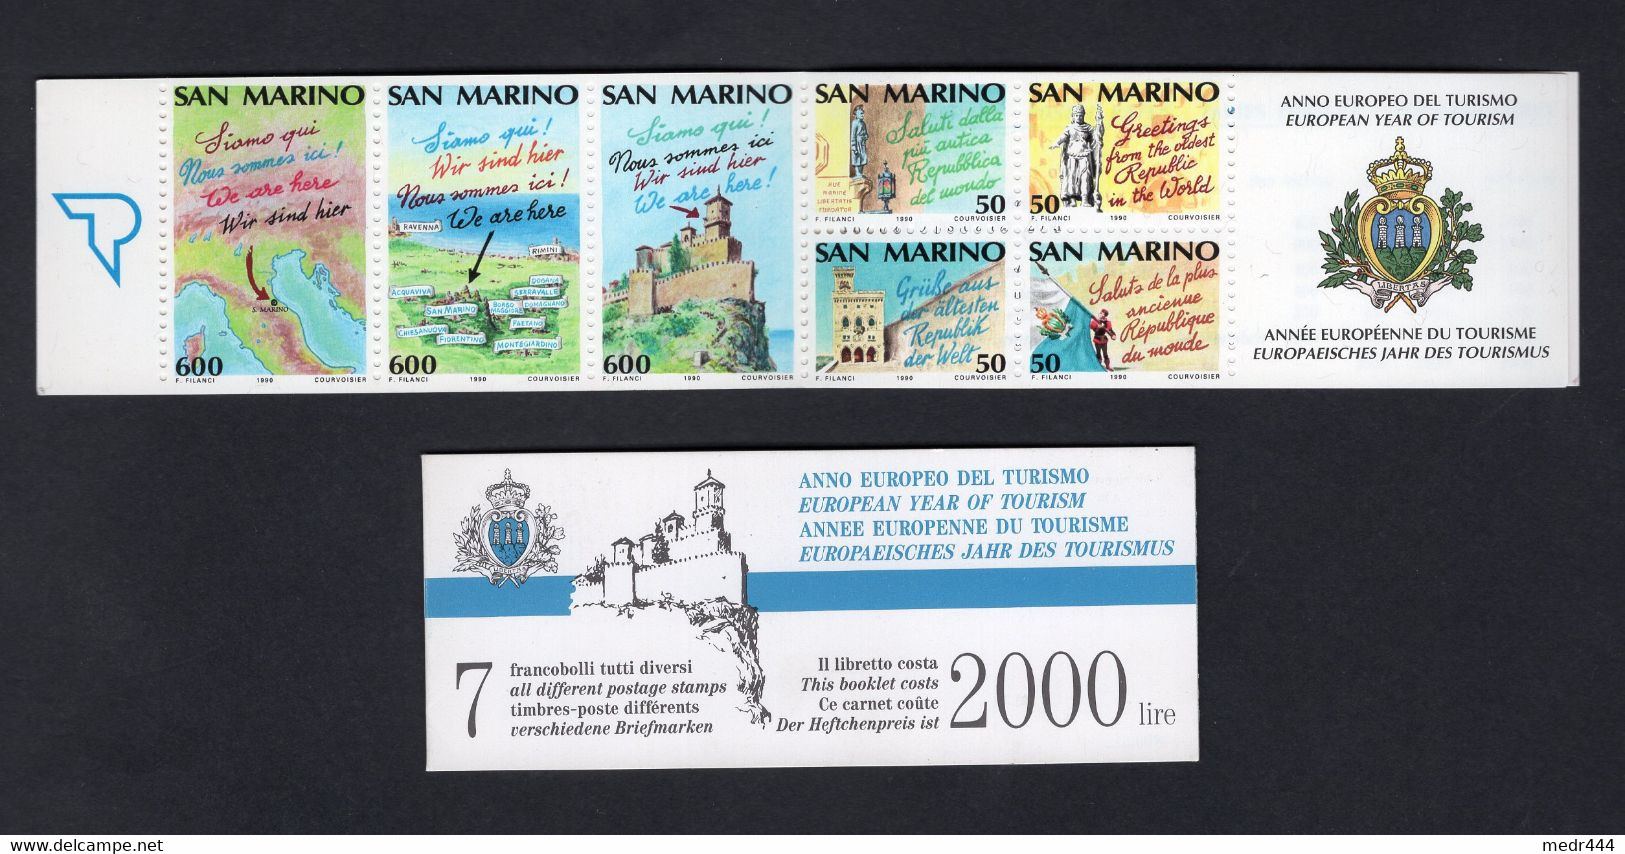 San Marino 1990 - Booklet - European Tourism Day - MNH** - Excellent Quality - Superb*** - Booklets